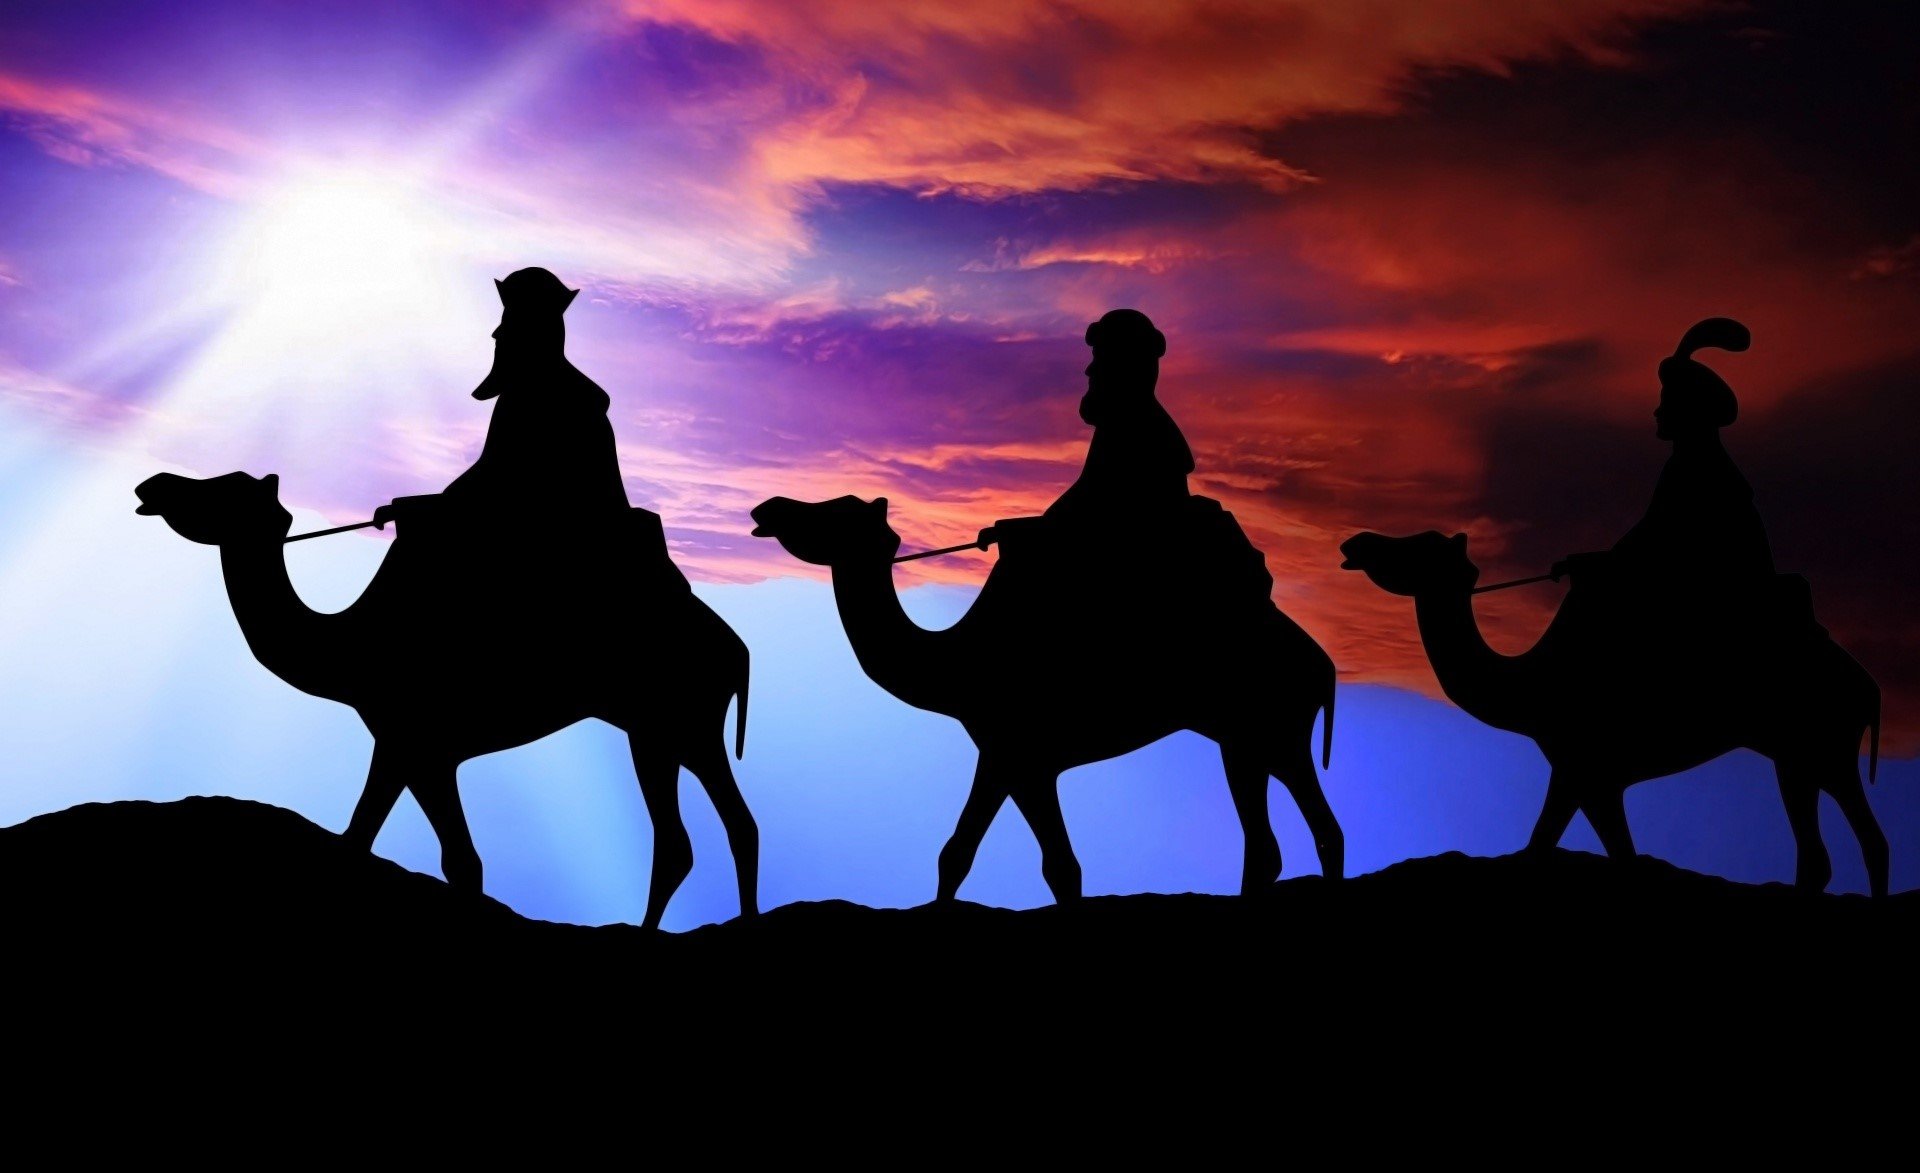 The three wise kings following the biblical star of Bethlehem